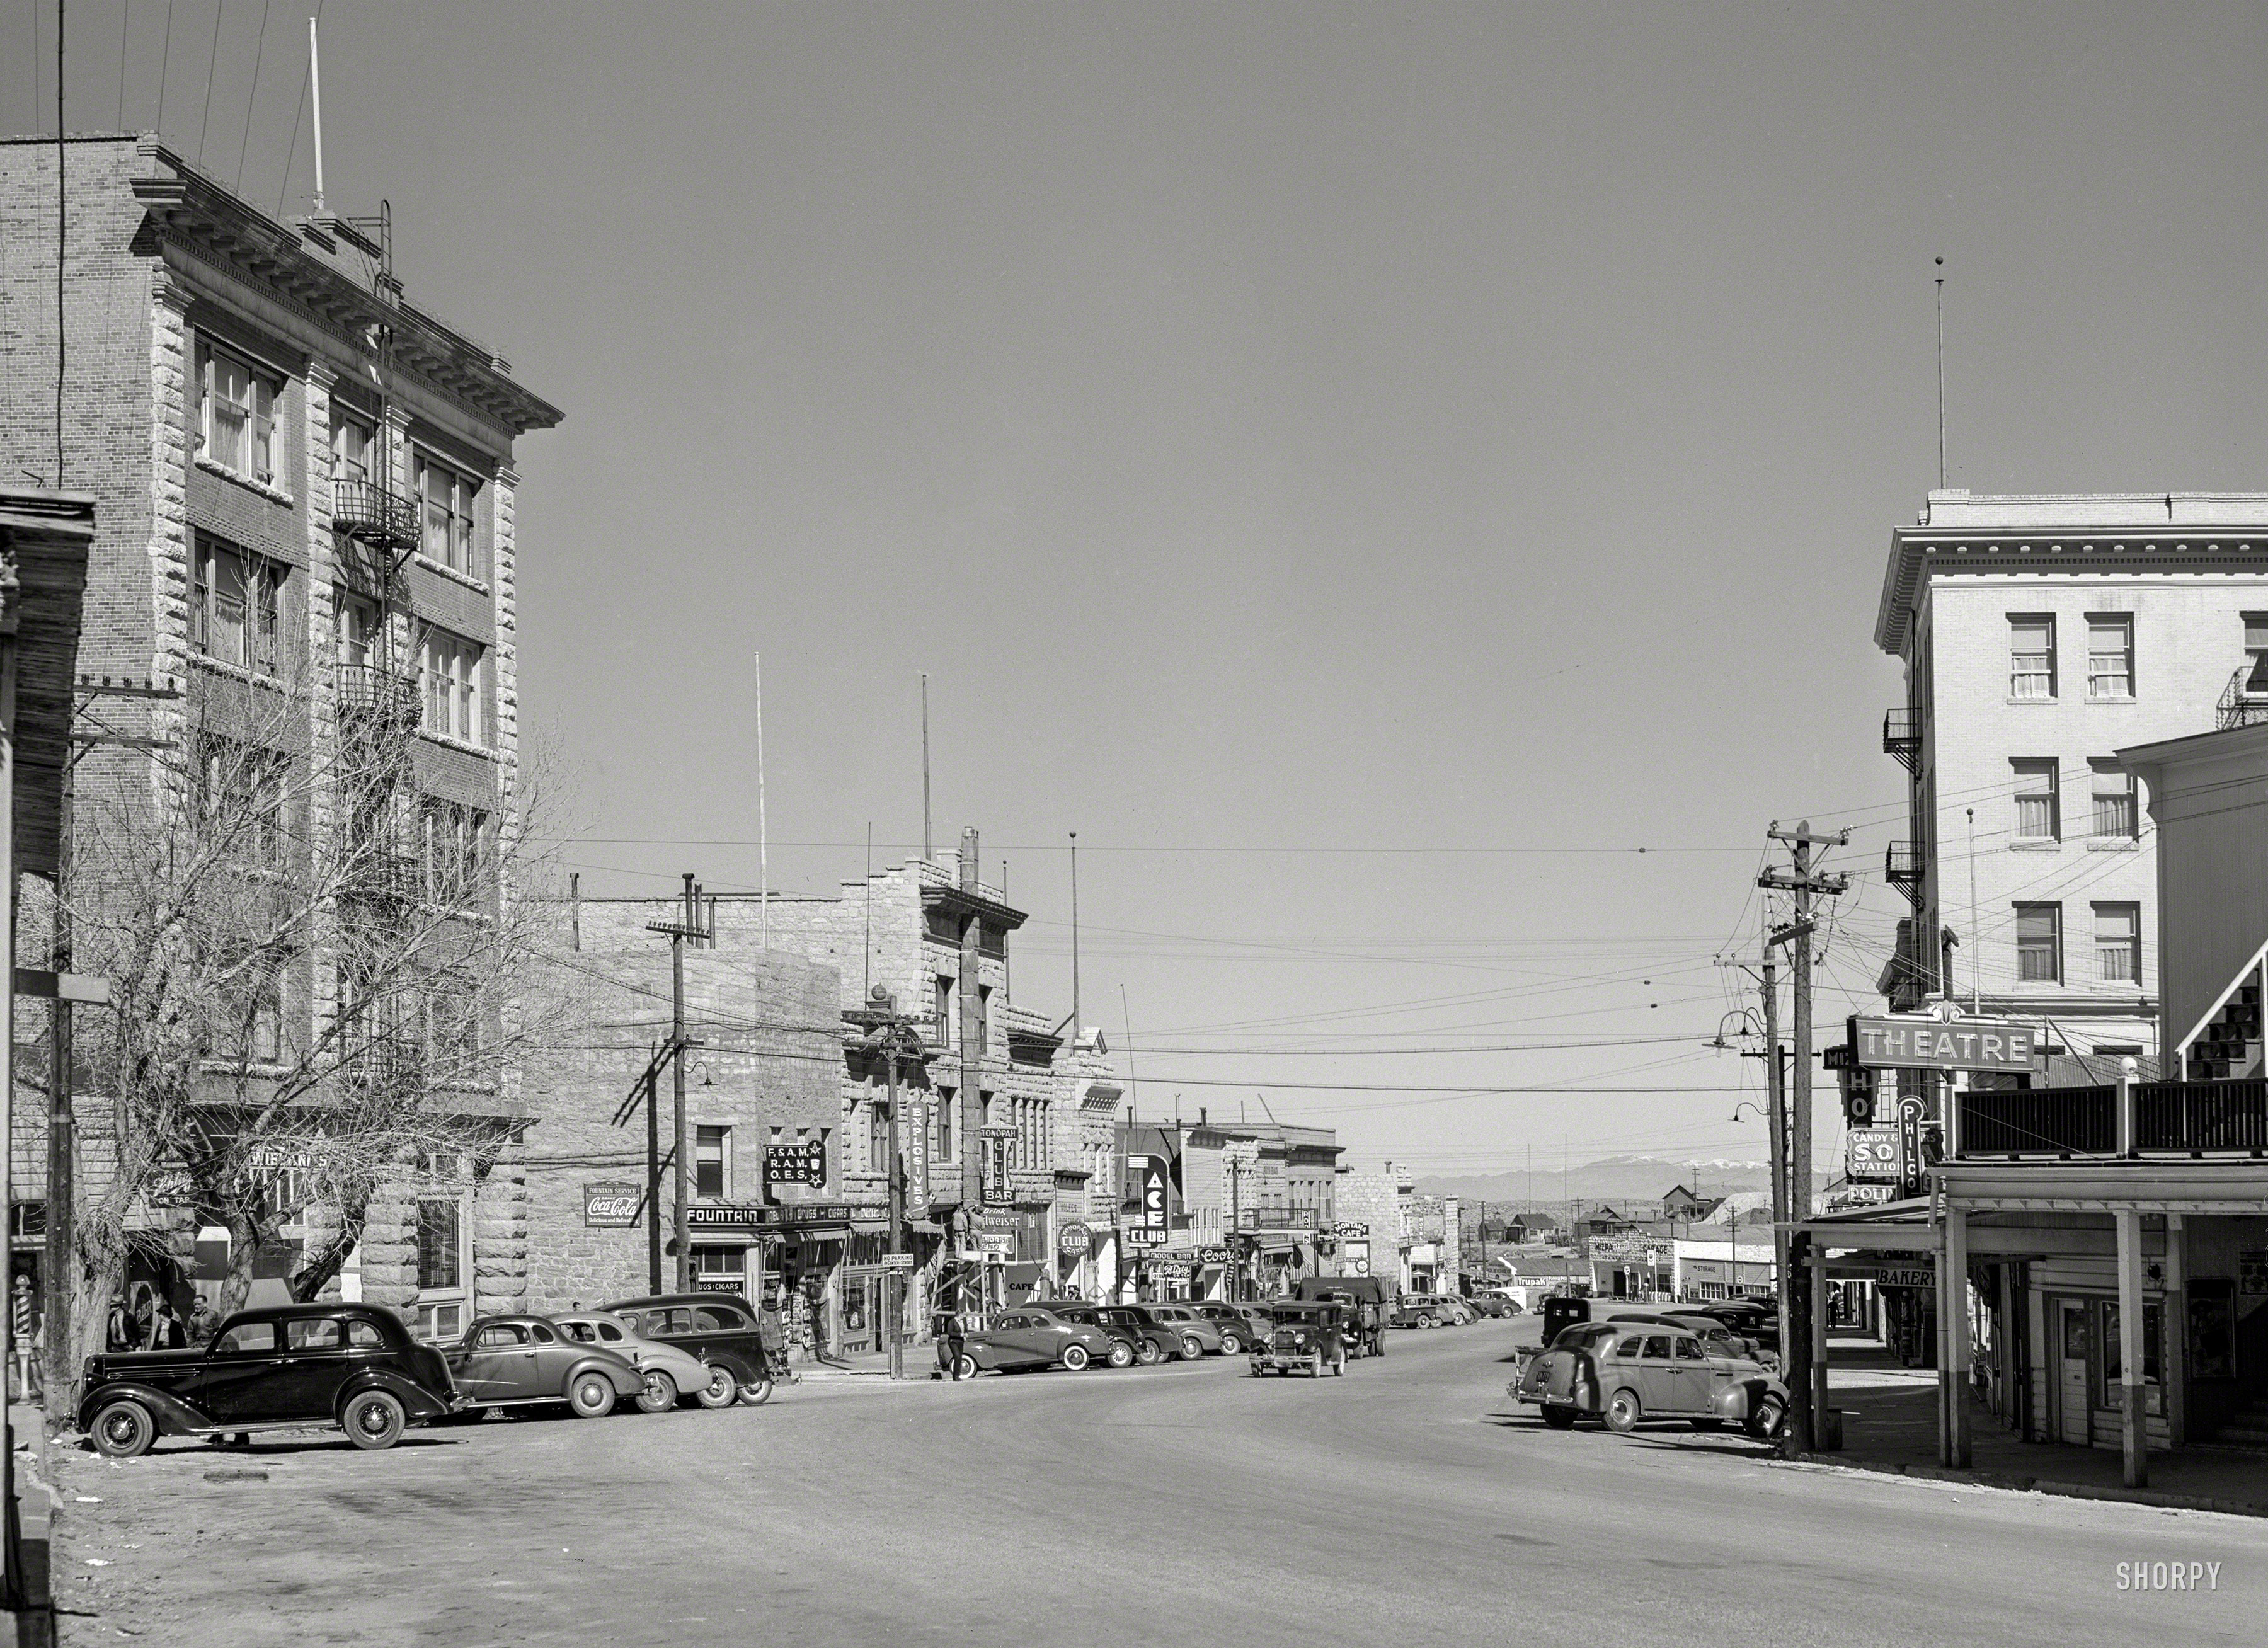 March 1940. "Main Street in Tonopah, Nevada." If you can't find us at the Ace or Tonopah clubs, try next door at EXPLOSIVES. Or maybe the F. & A.M. R.A.M. O.E.S. Medium format negative by Arthur Rothstein. View full size.